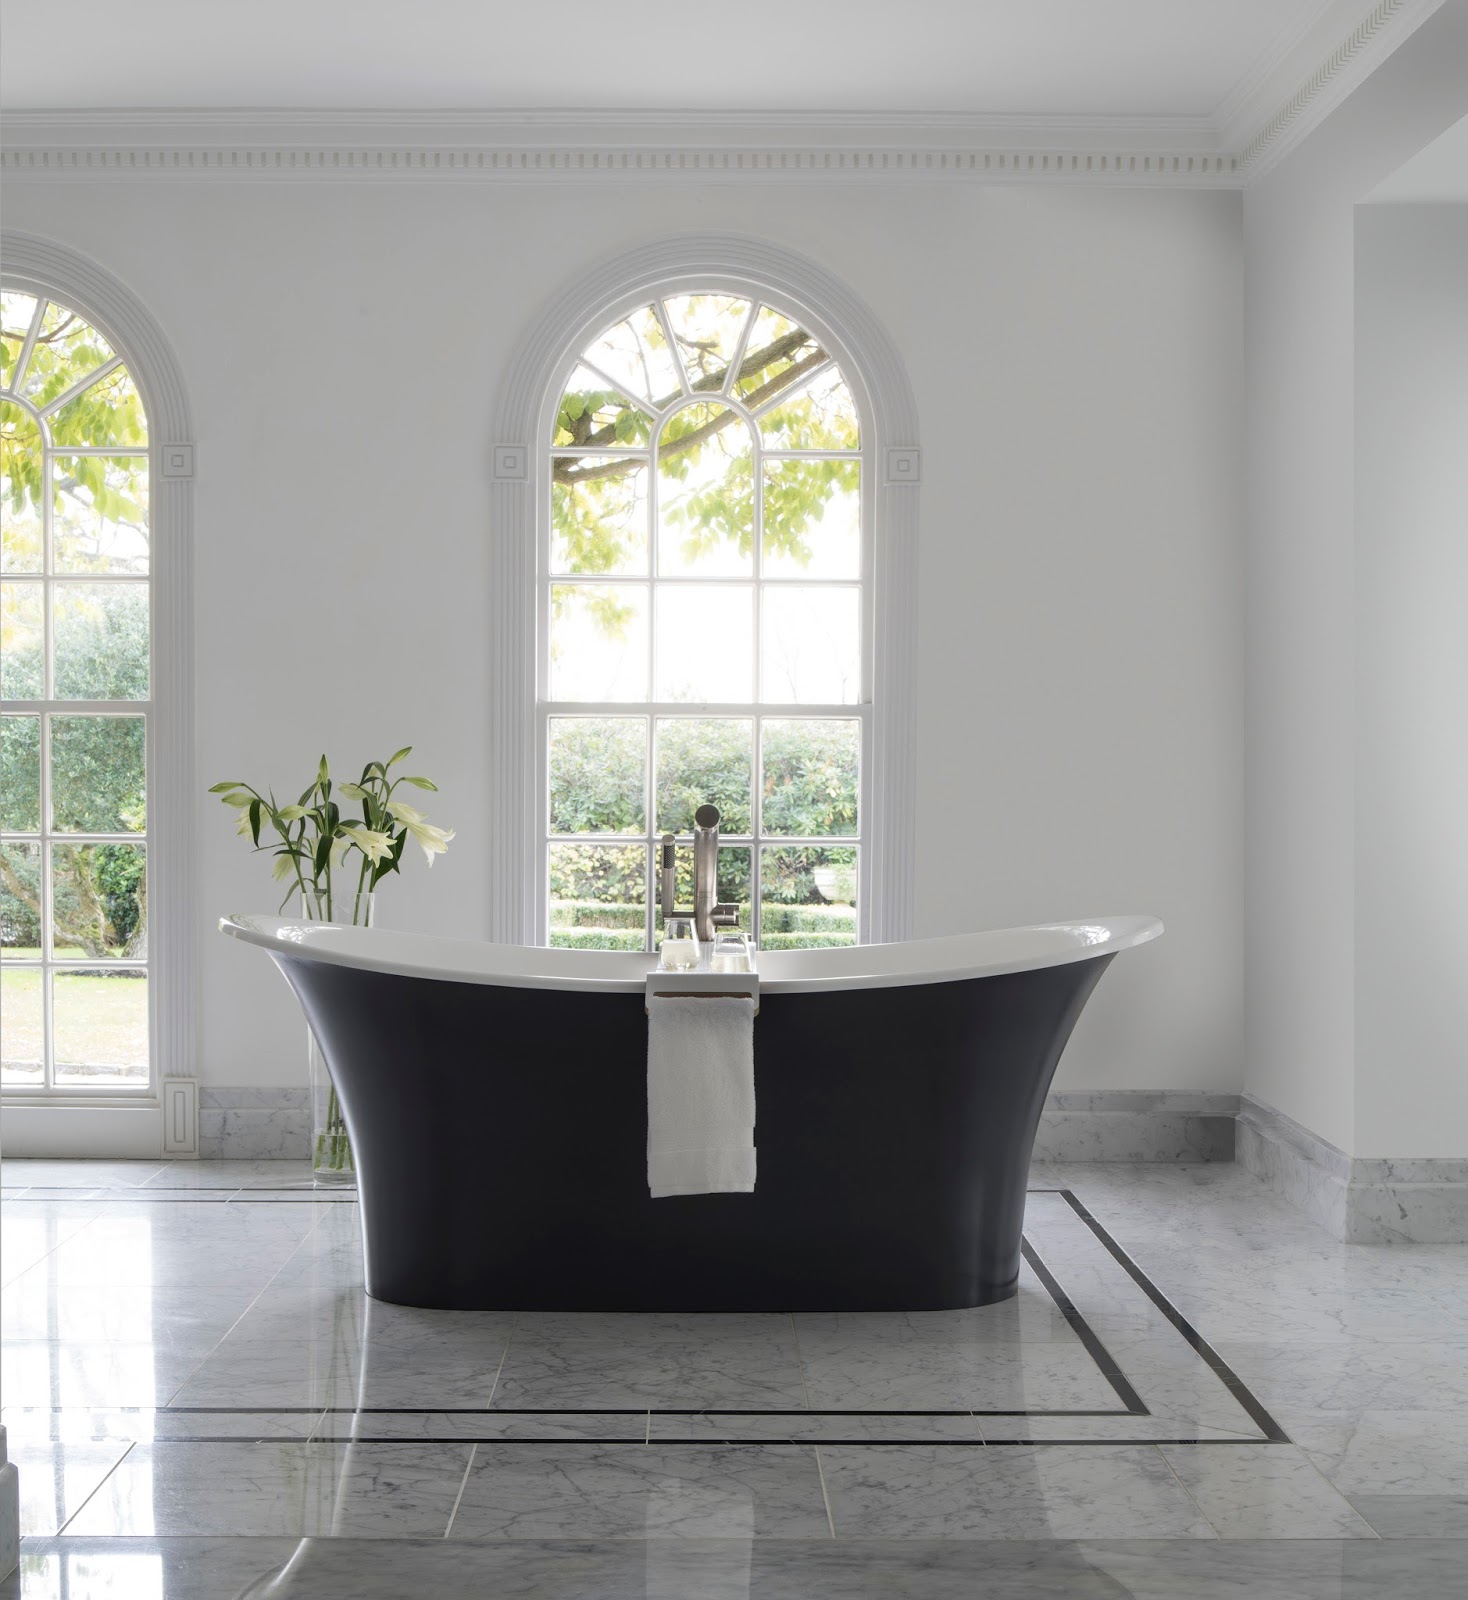 Top 5 Freestanding Tubs | Harlow & Thistle - Home Design ...